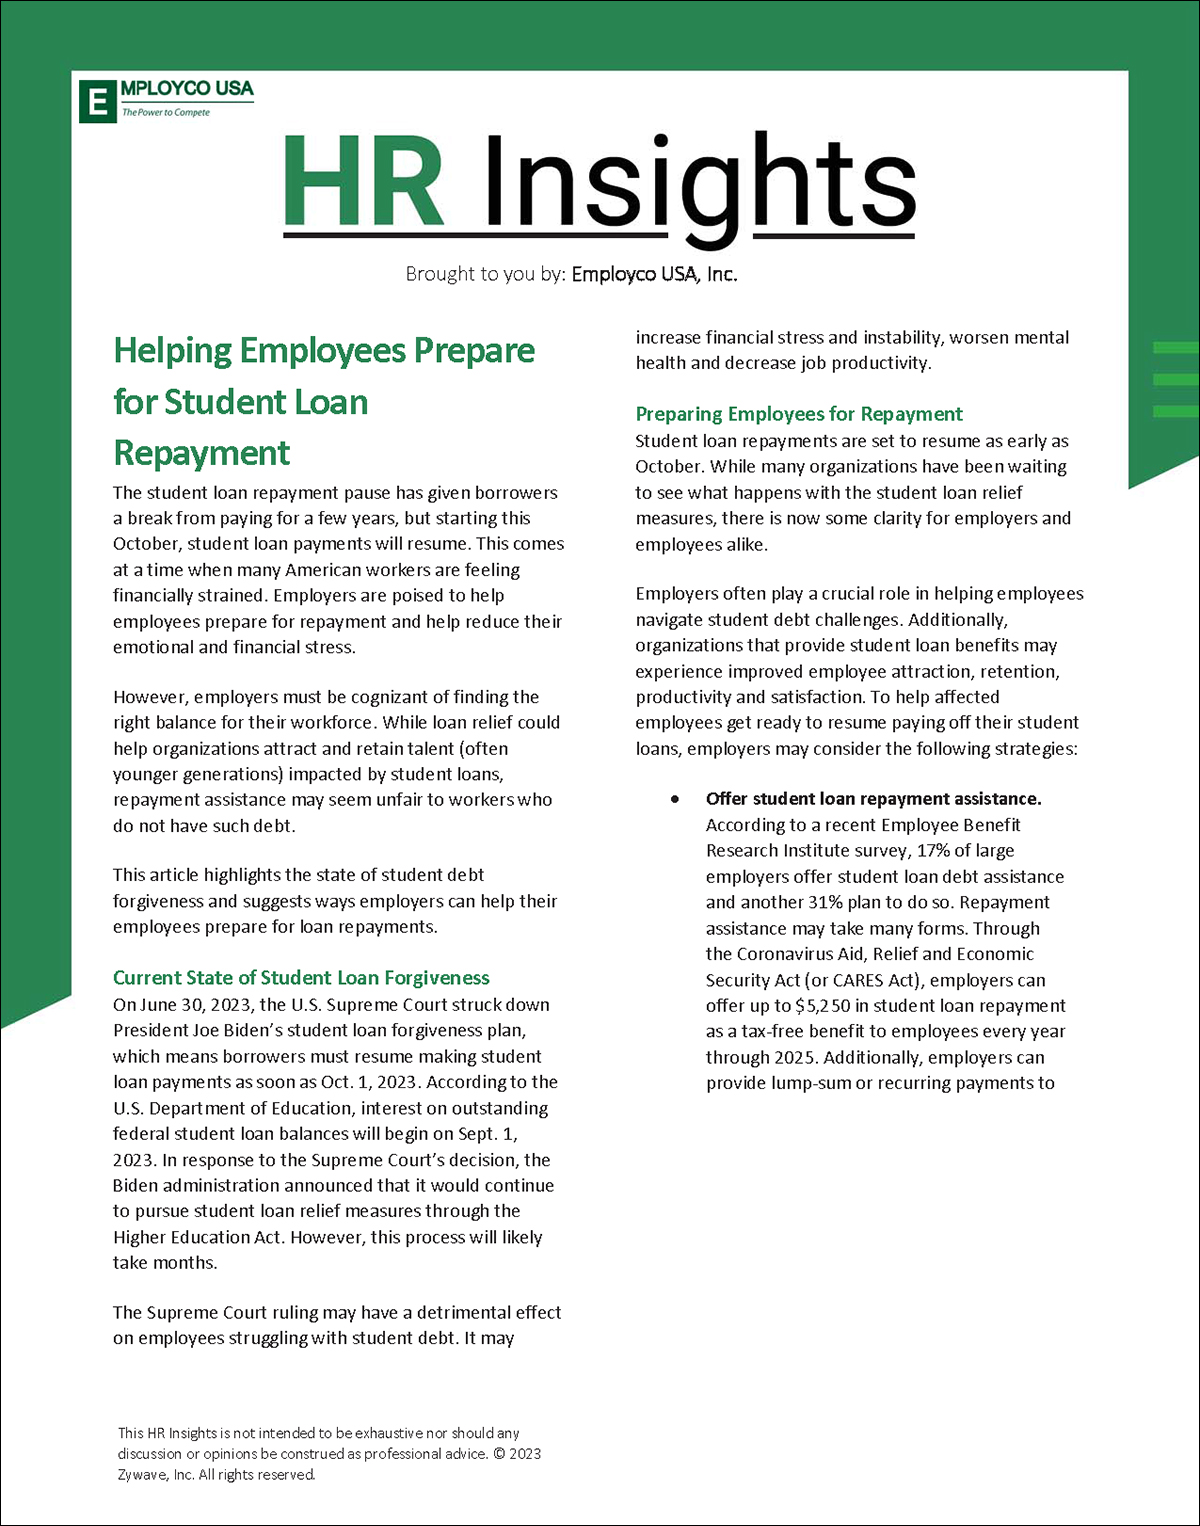 Helping Employees Prepare for Student Loan Repayment